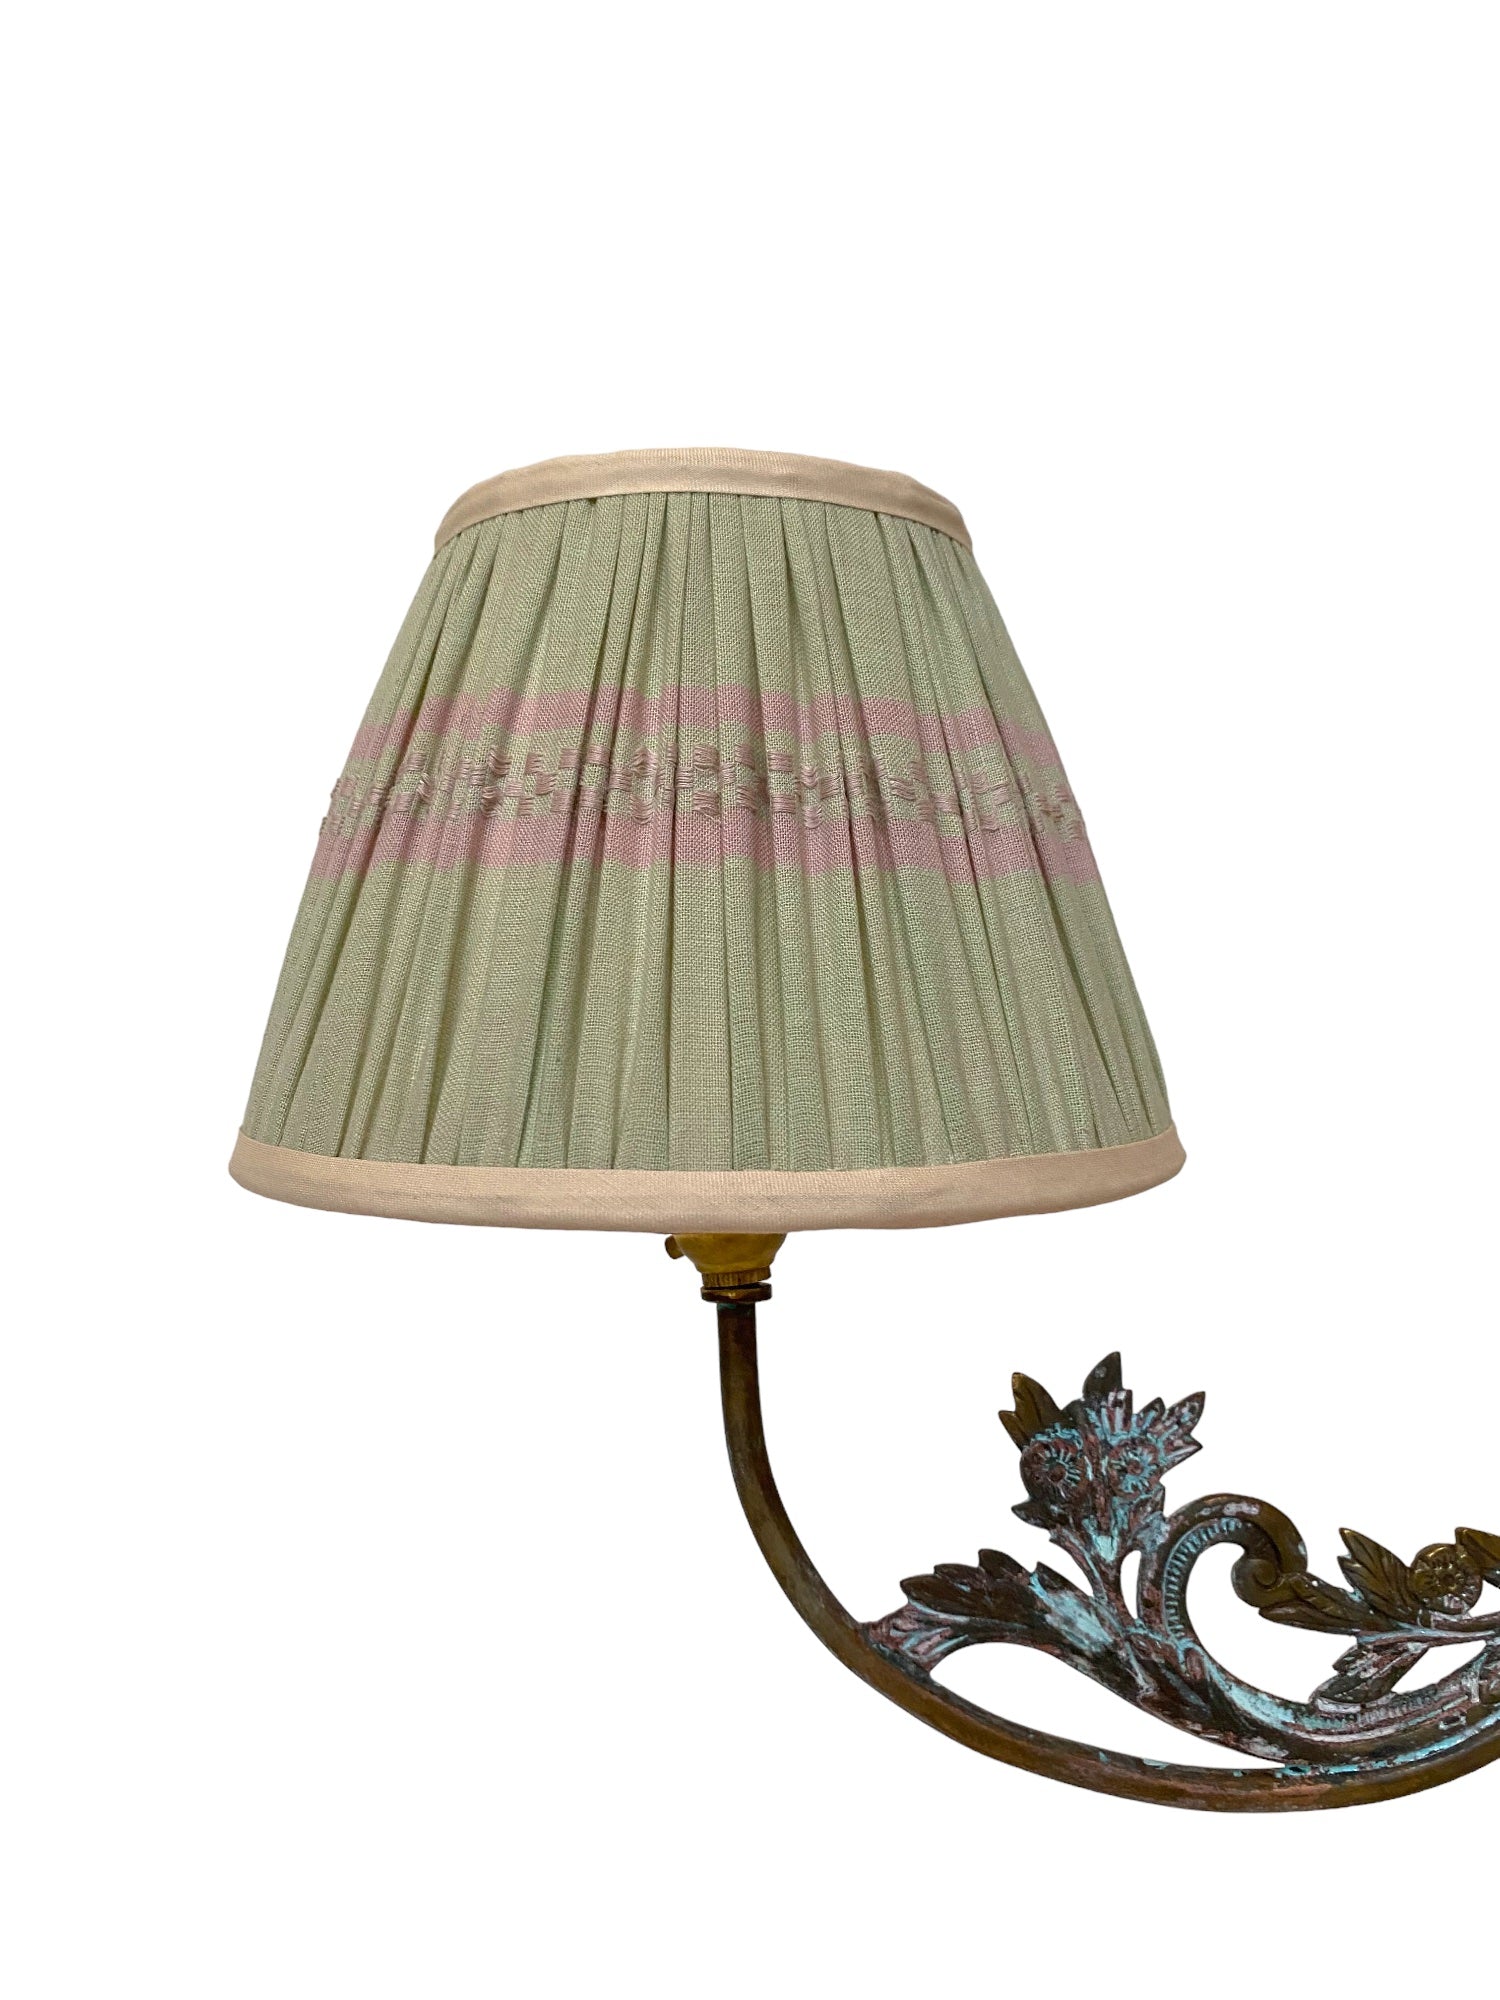 Assam pink 18cm clip on lampshade